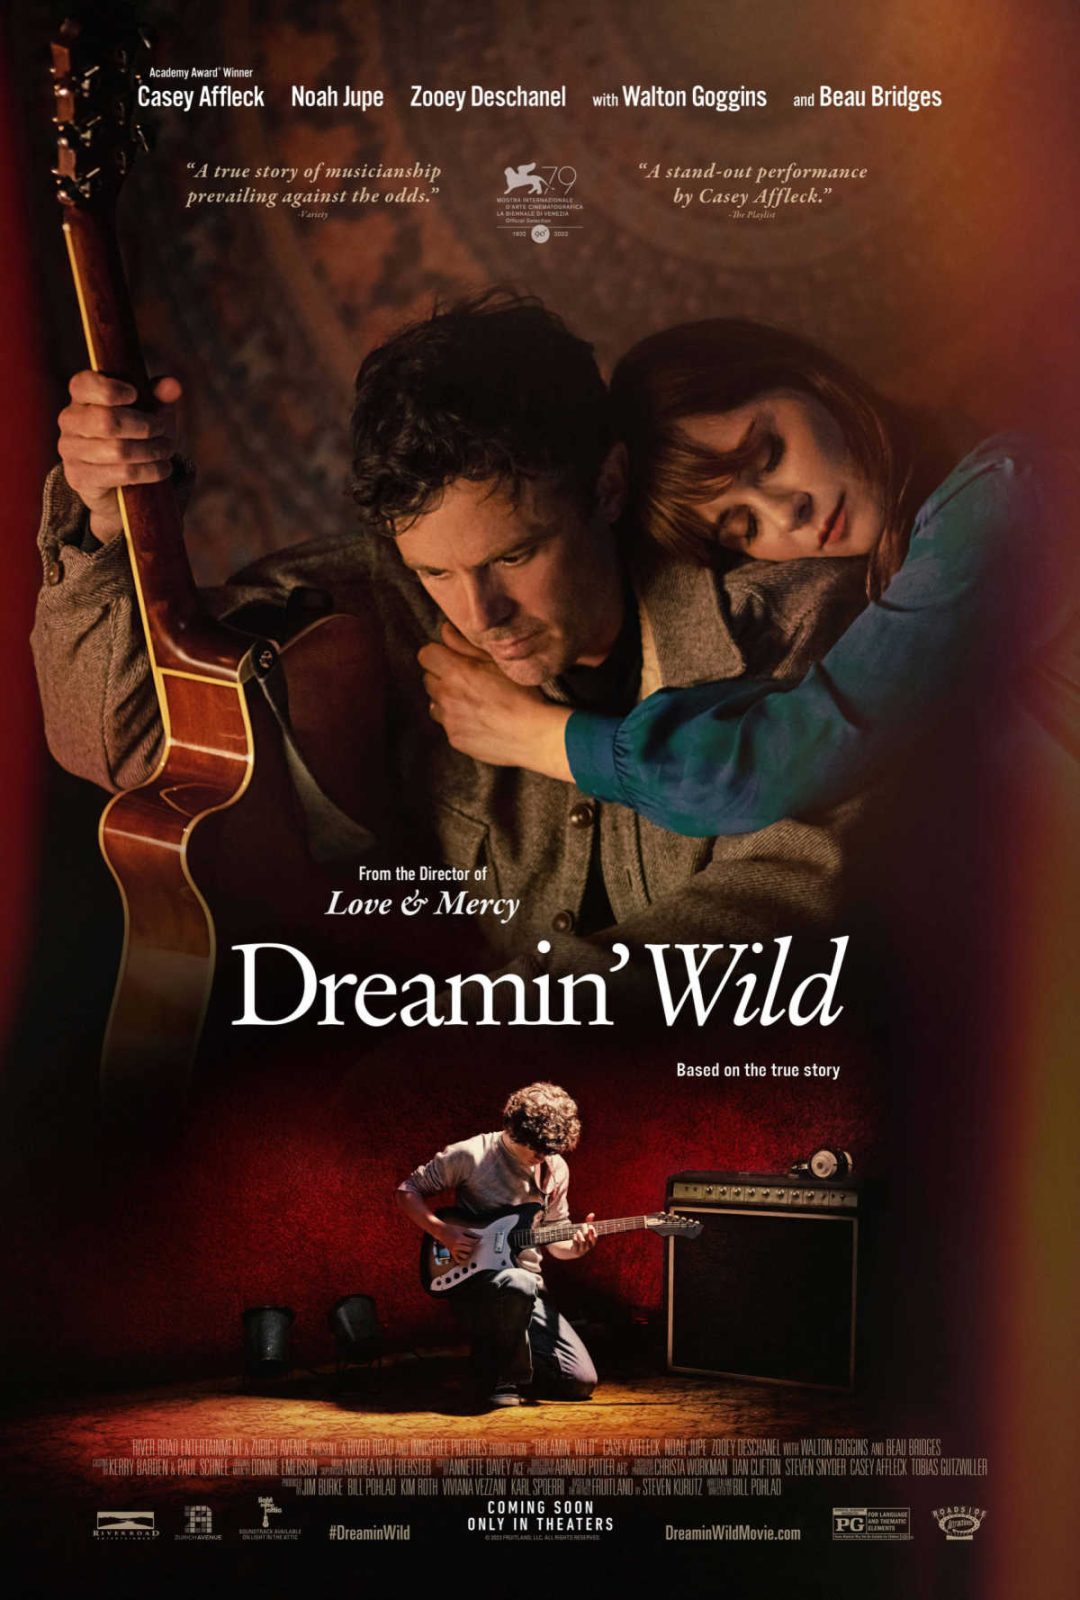 Dreamin' Wild is an American biographical drama film set in the 1970s in the small town of Fruitland, Washington.